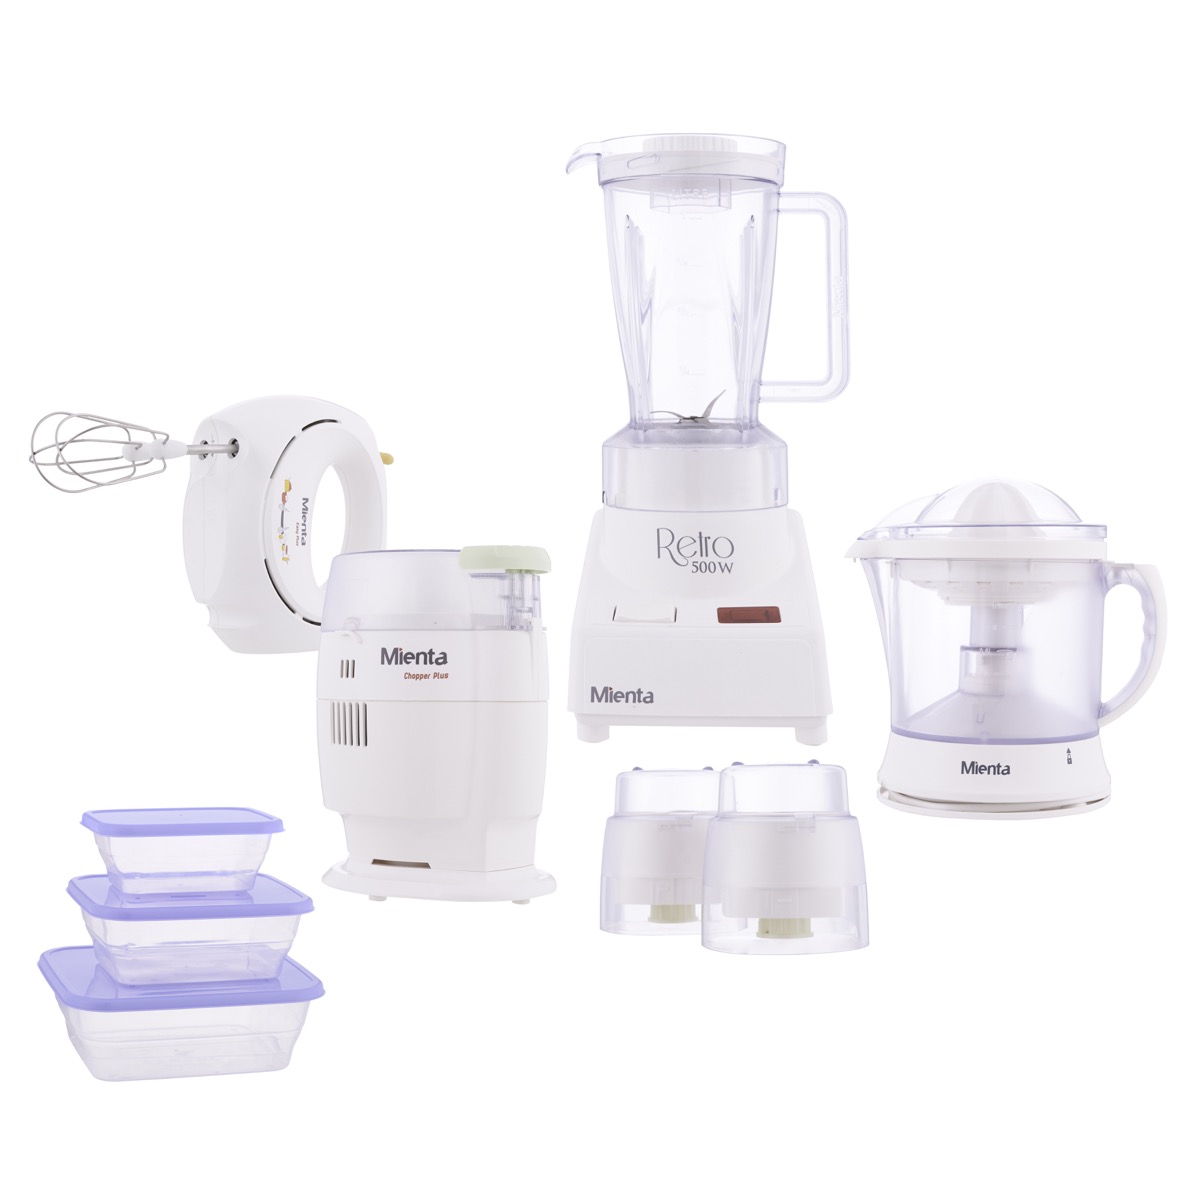 Mienta Four in One bundle, Blender, Chopper, Hand mixer and Press Citrus - FP4000A